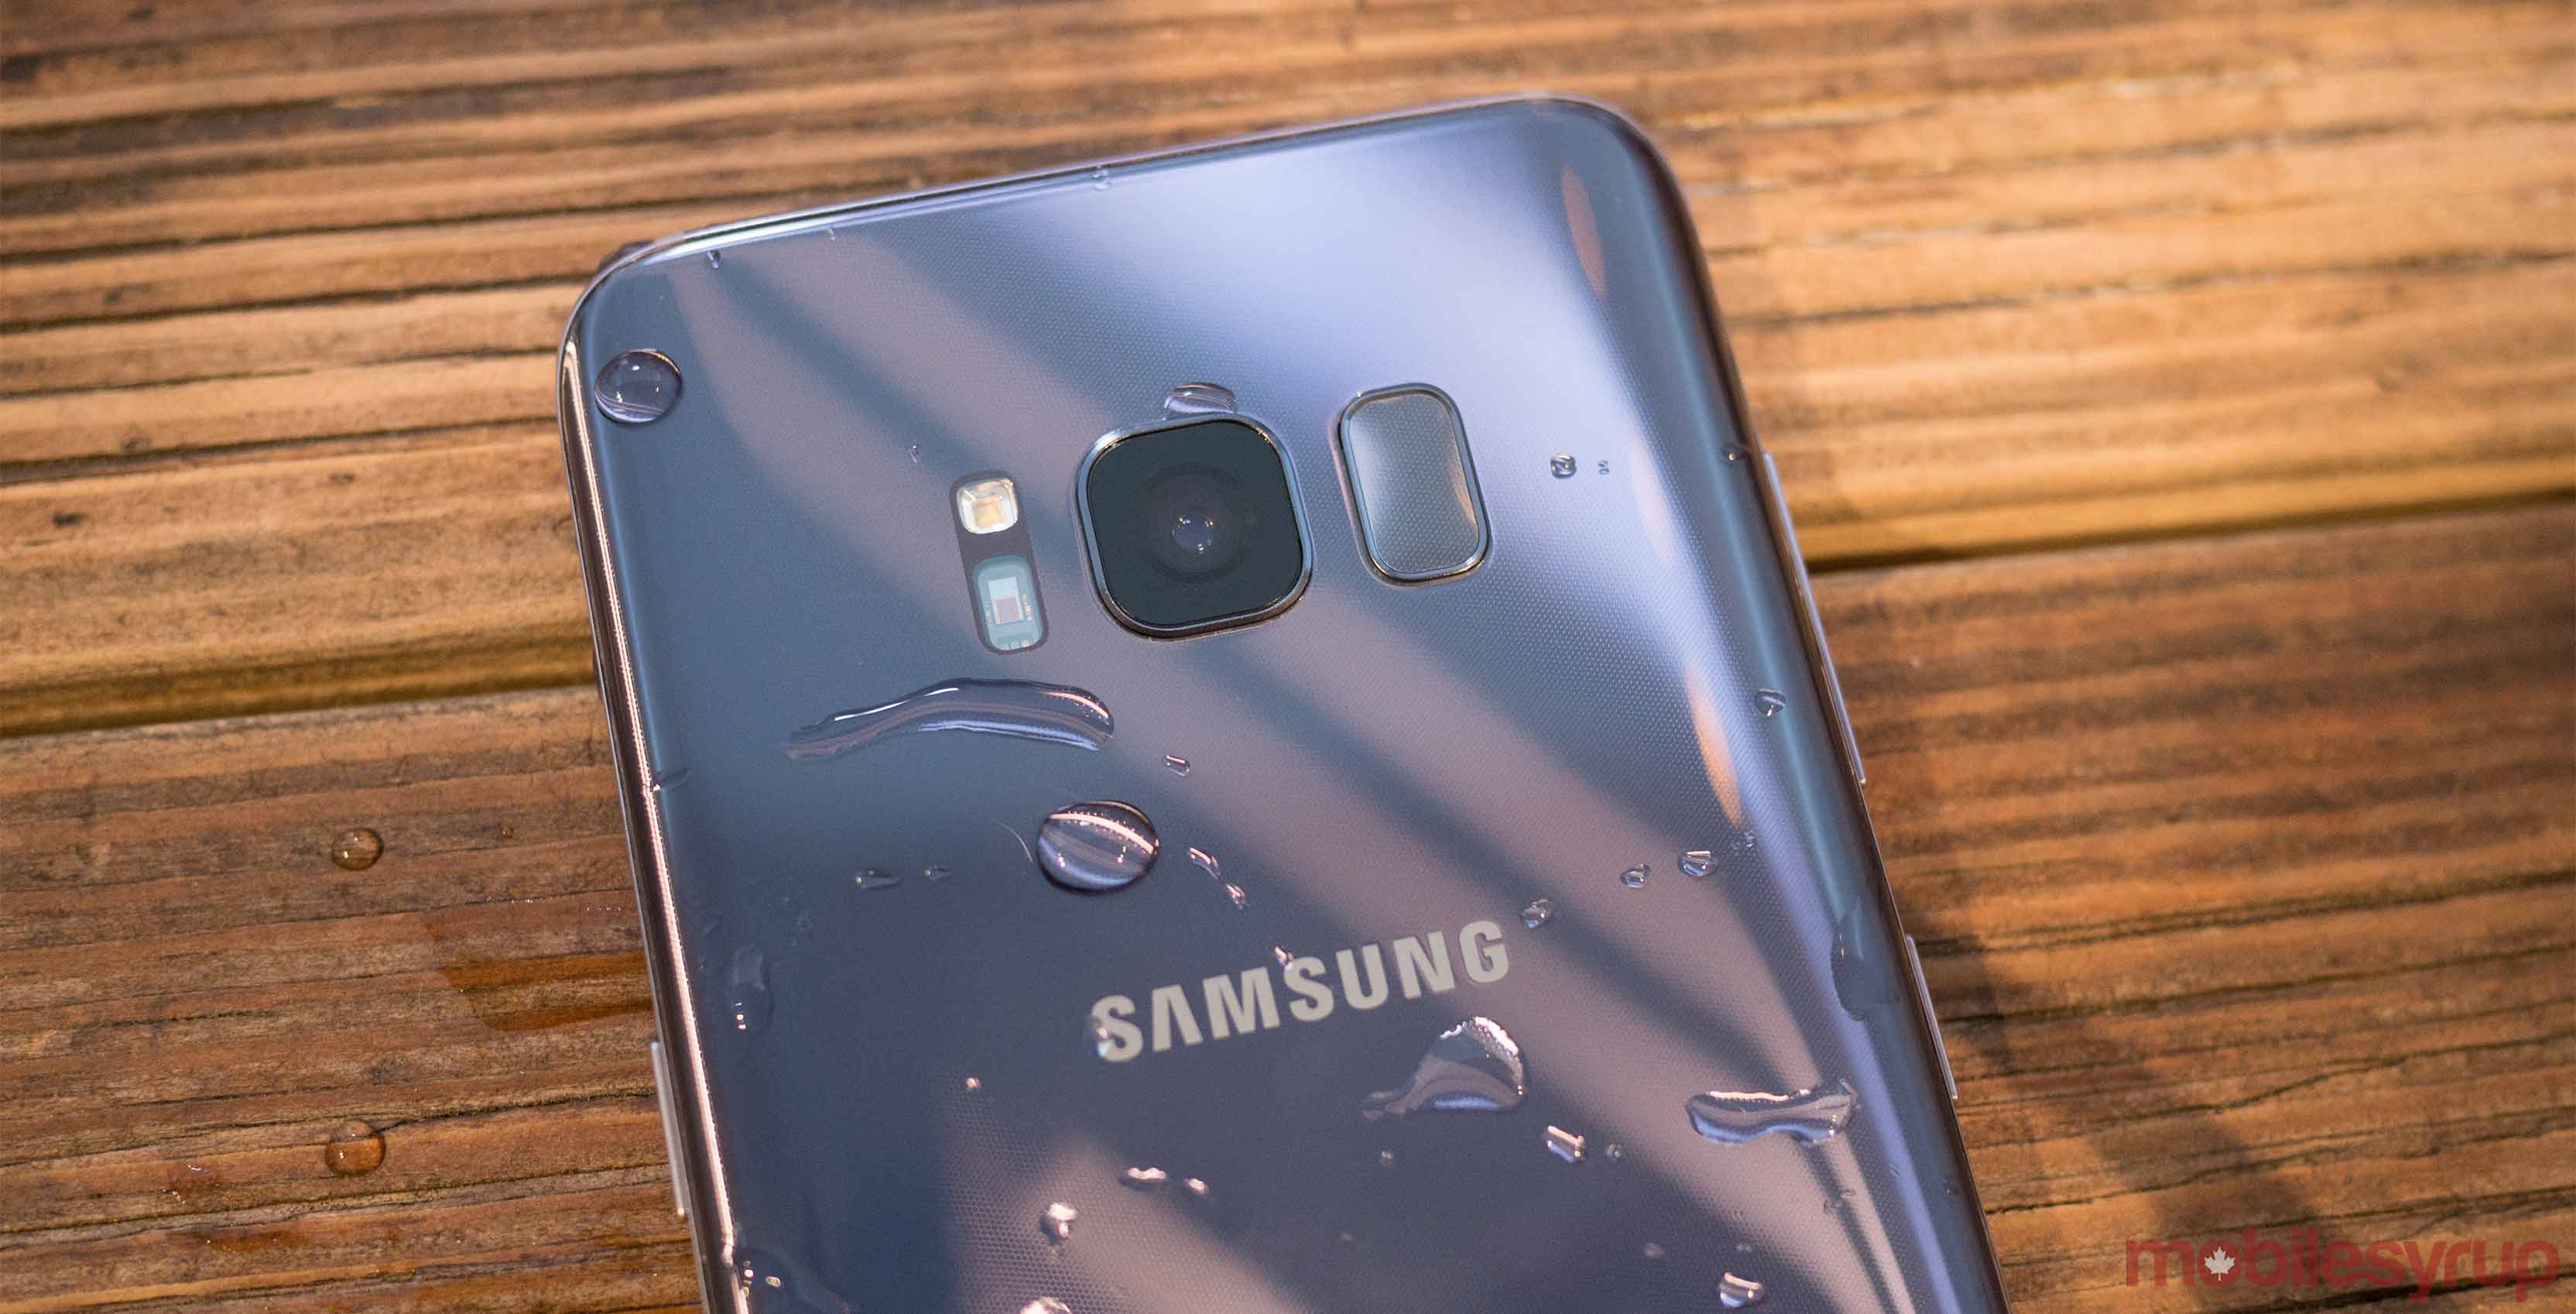 Samsung Galaxy S8 with water on it